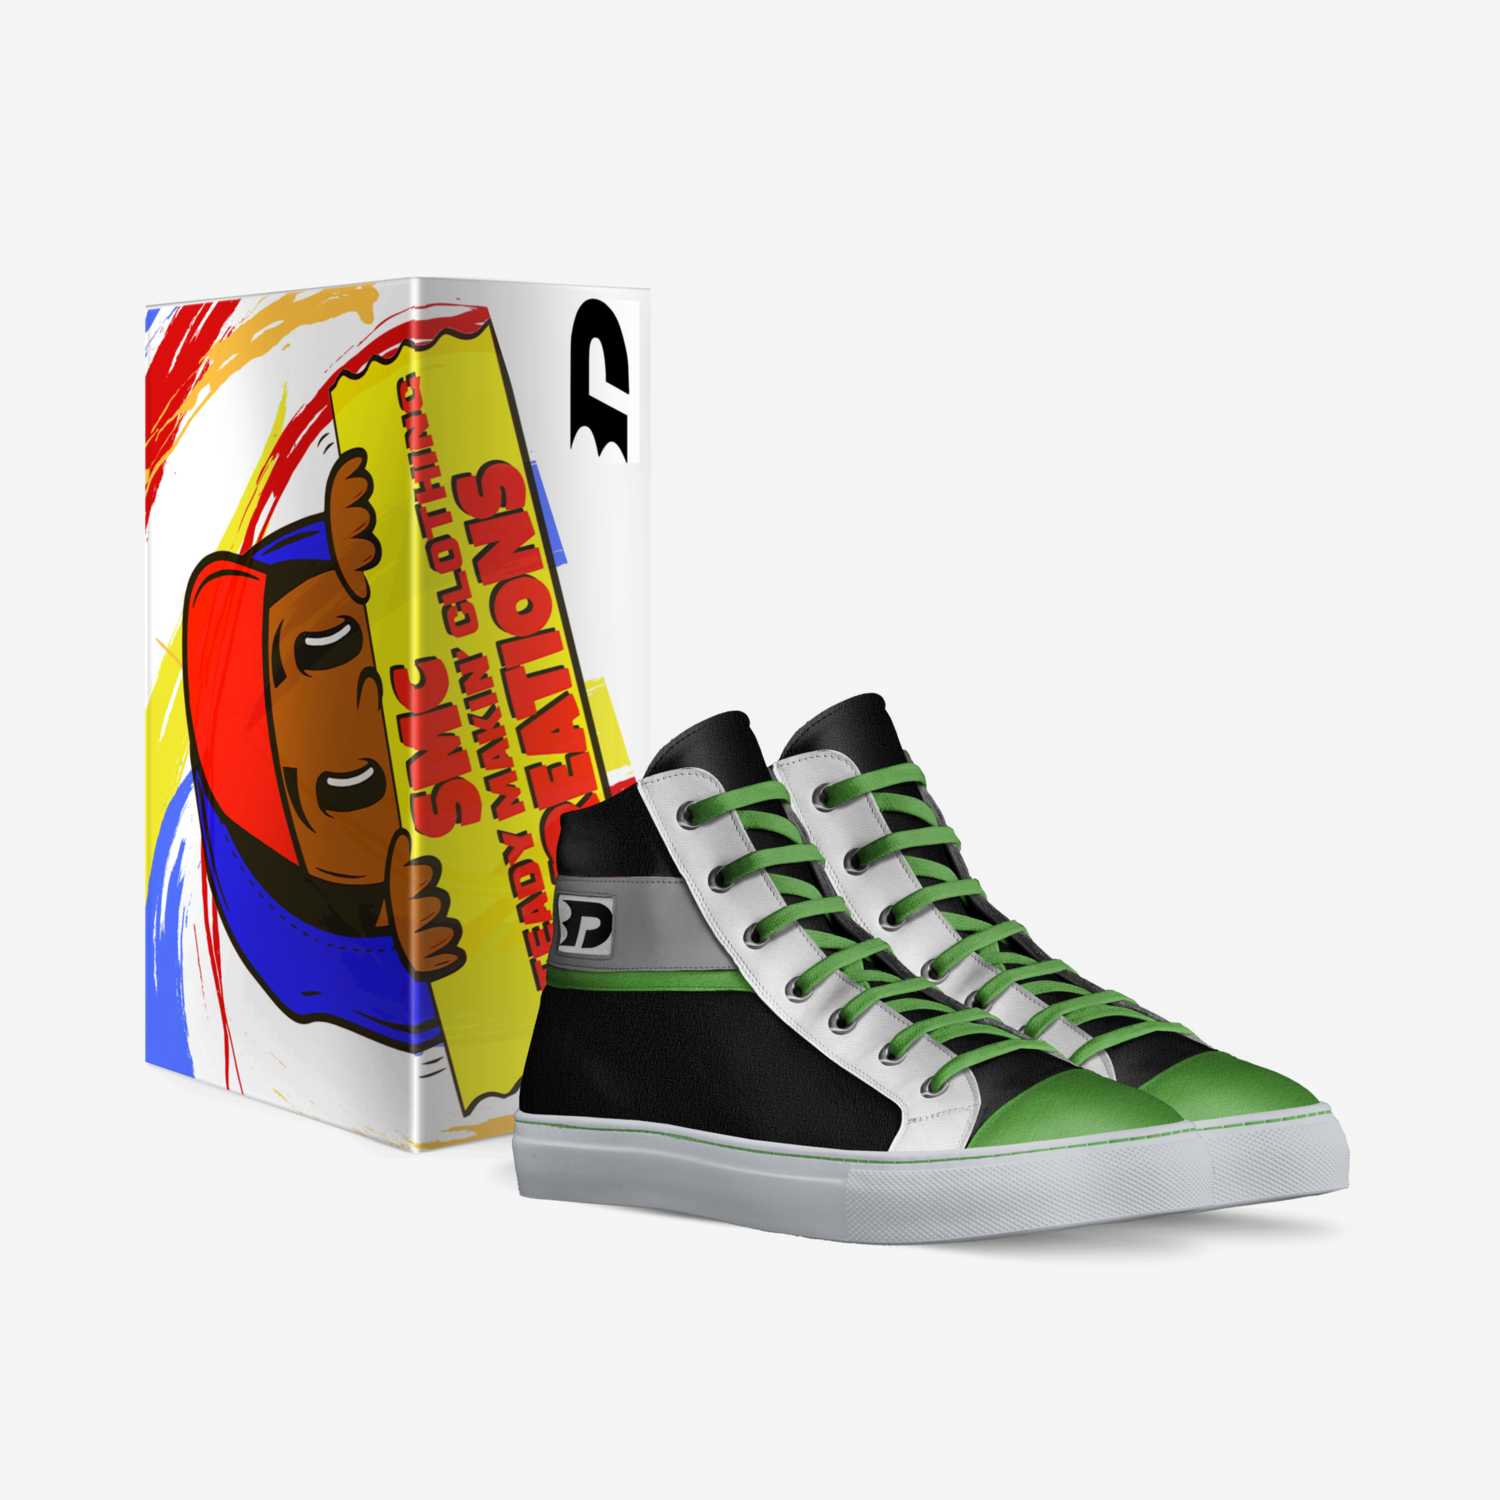 Danny Phantom custom made in Italy shoes by Shawn Mcnair | Box view